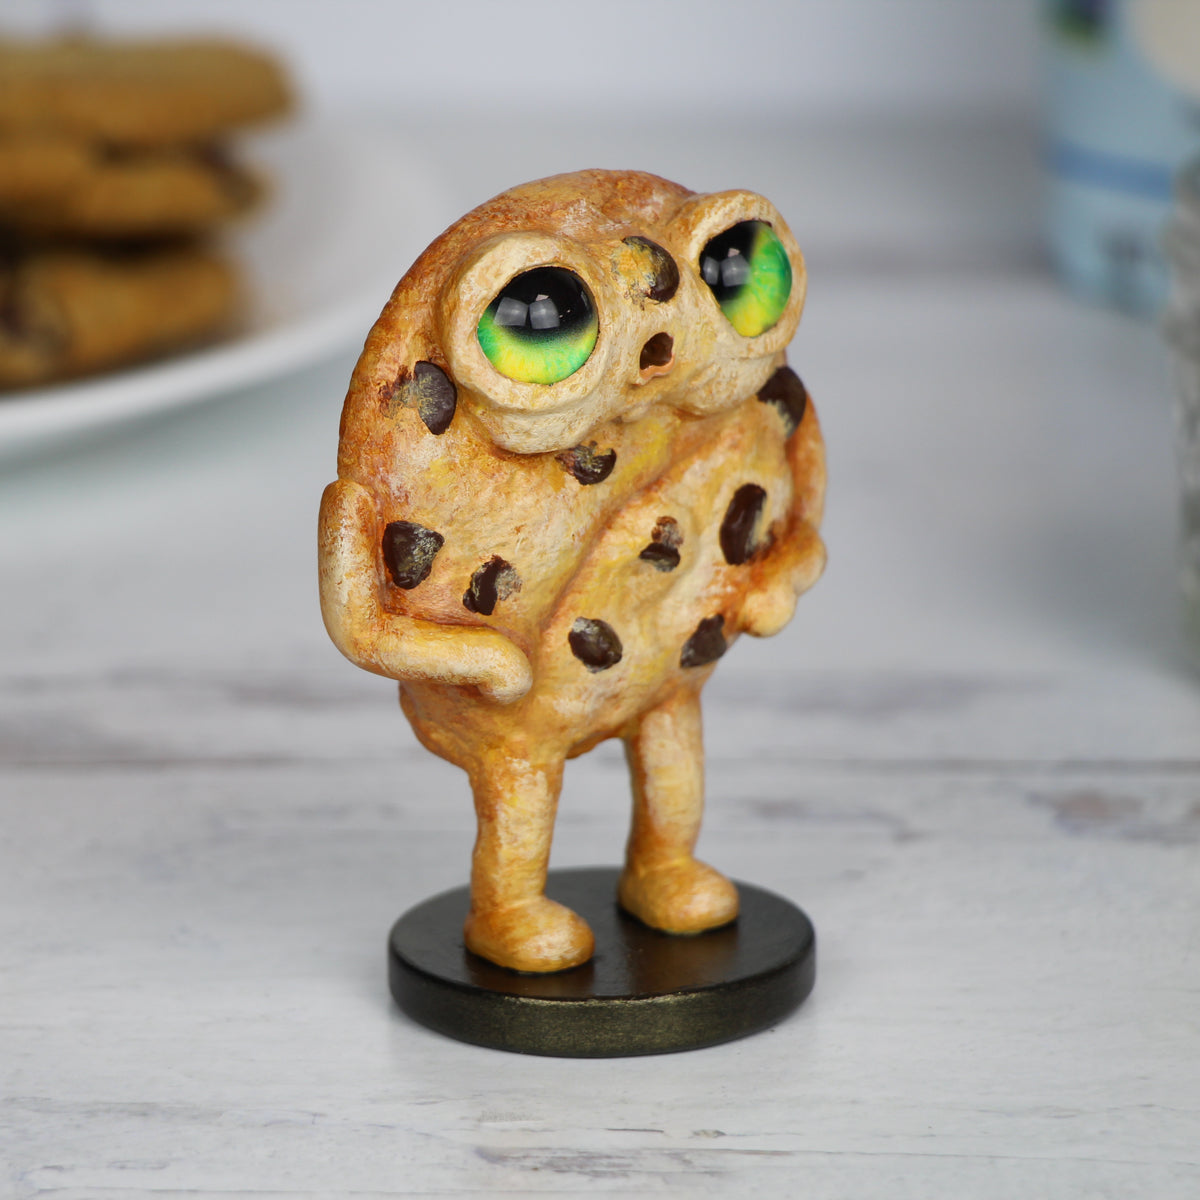 Gooey the Enchanted Cookie